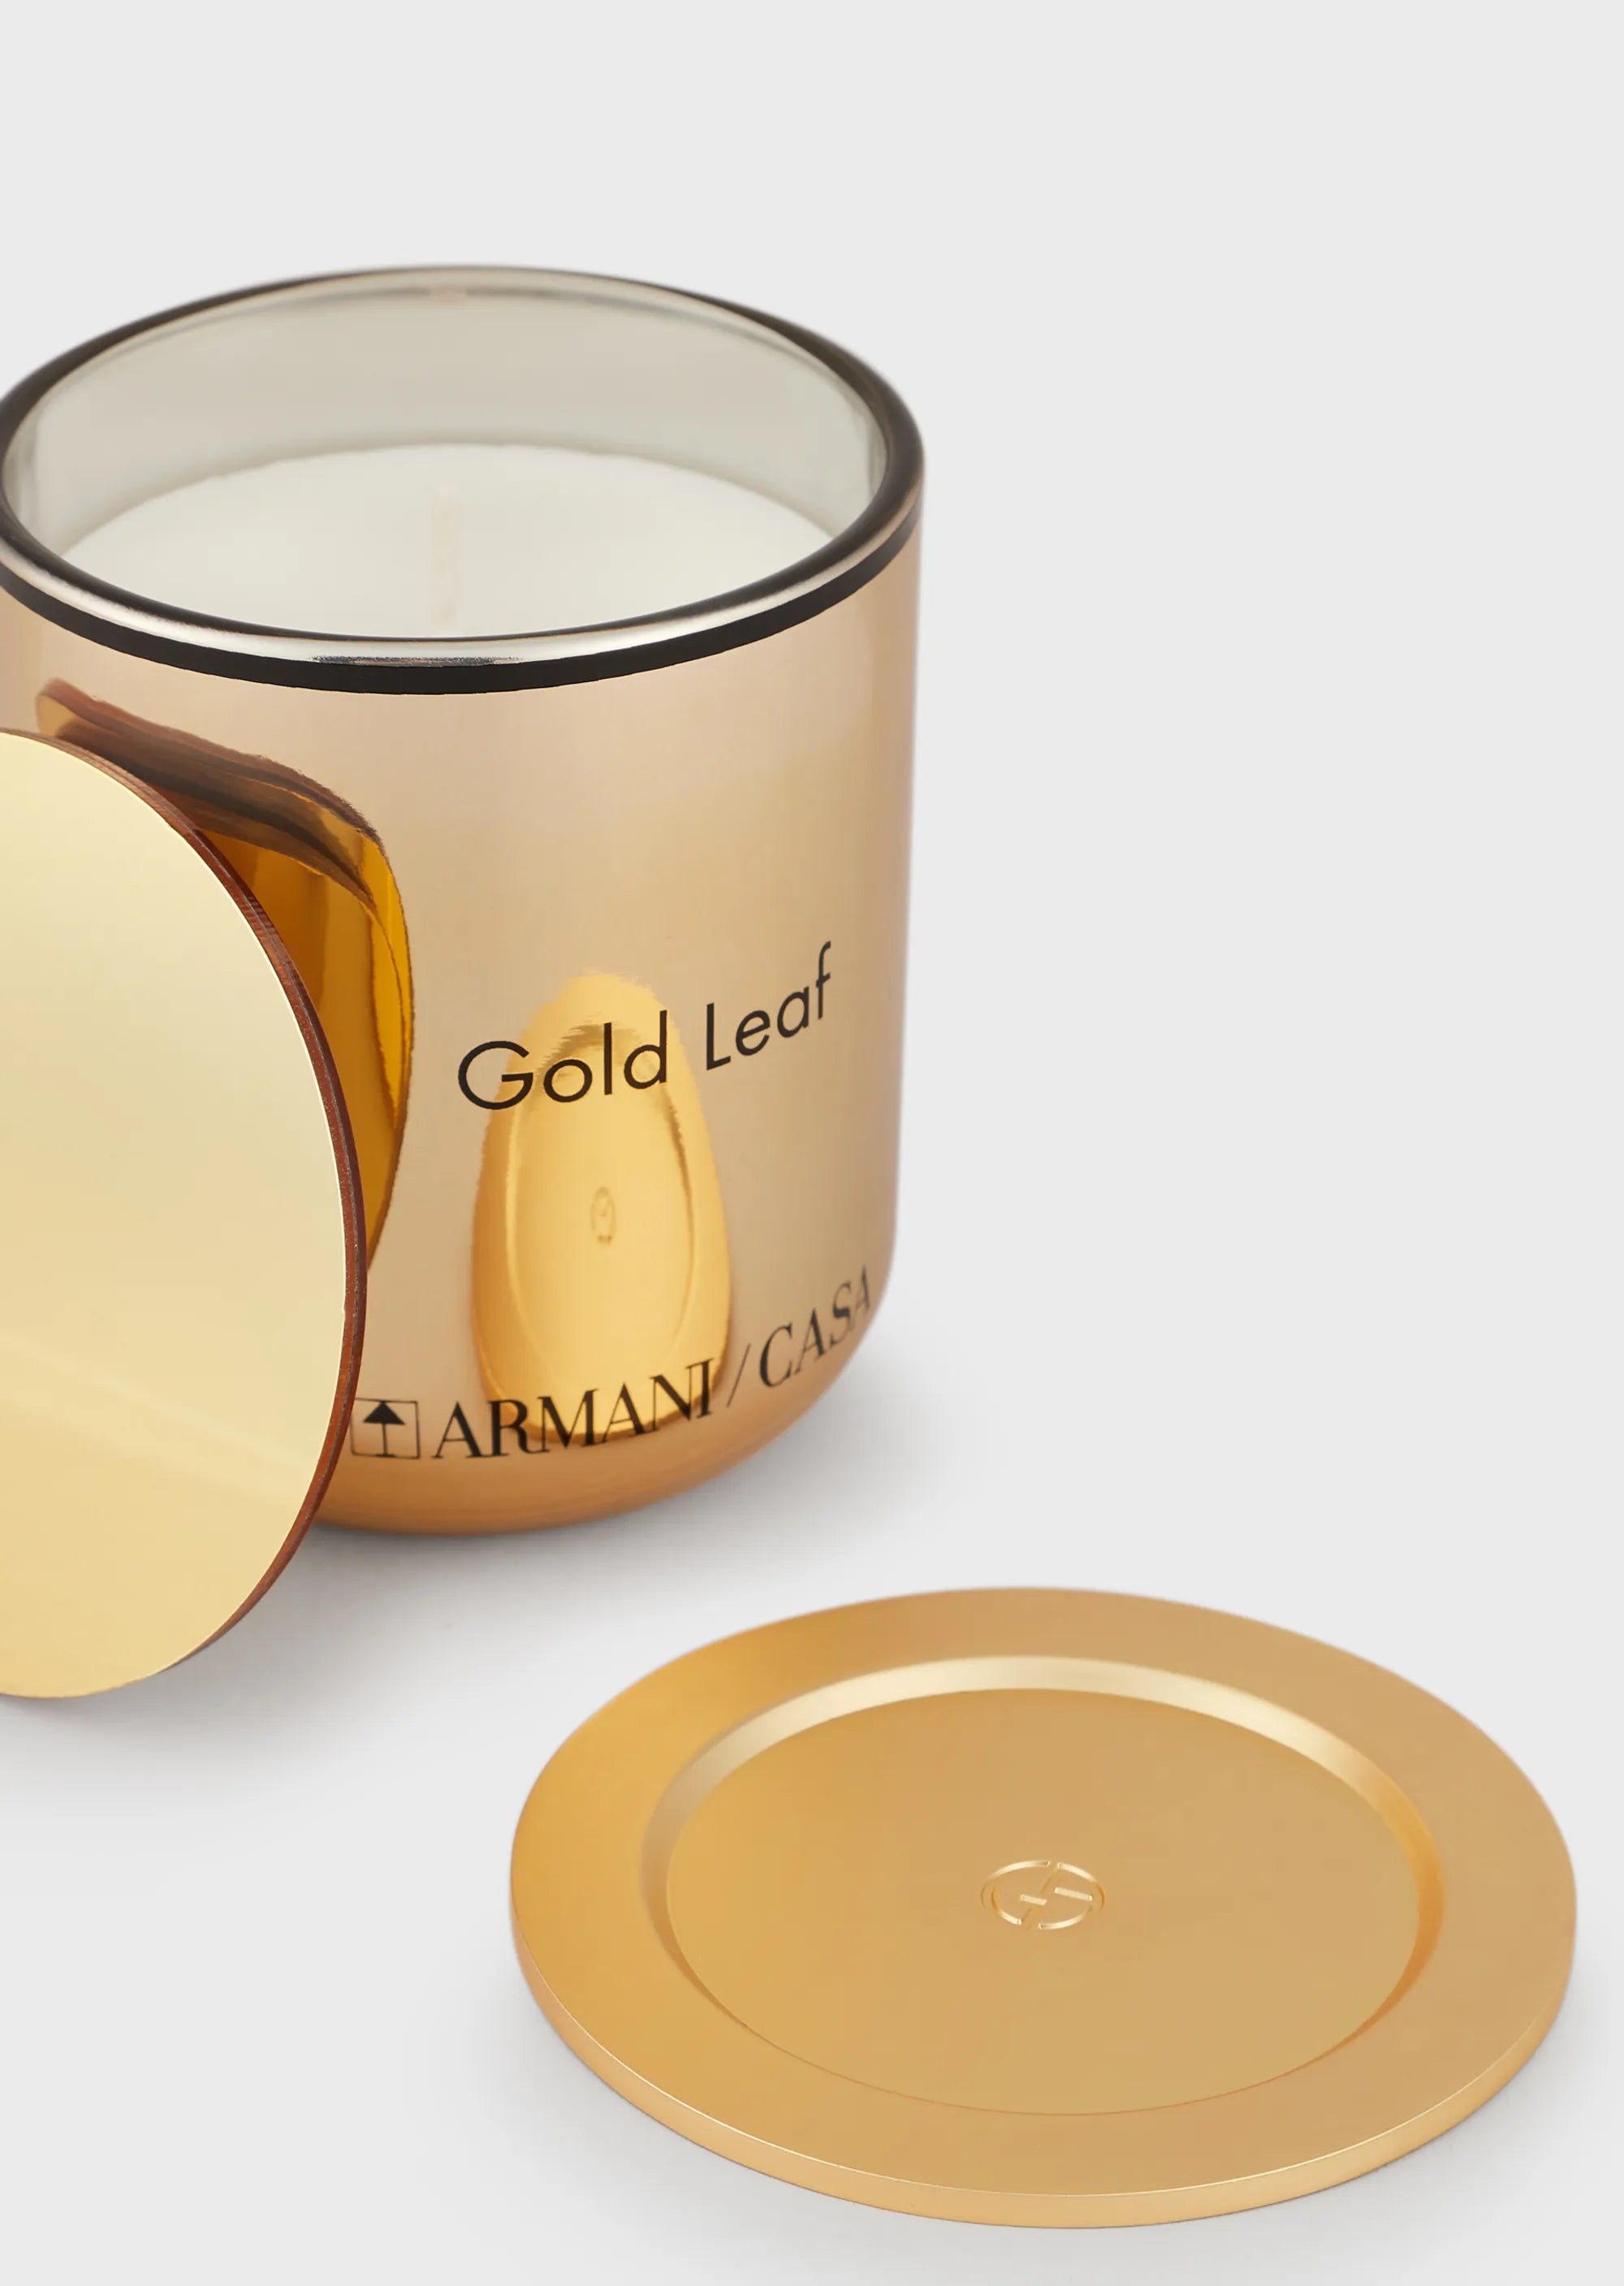 Pegaso Scented Candle in Gold Leaf